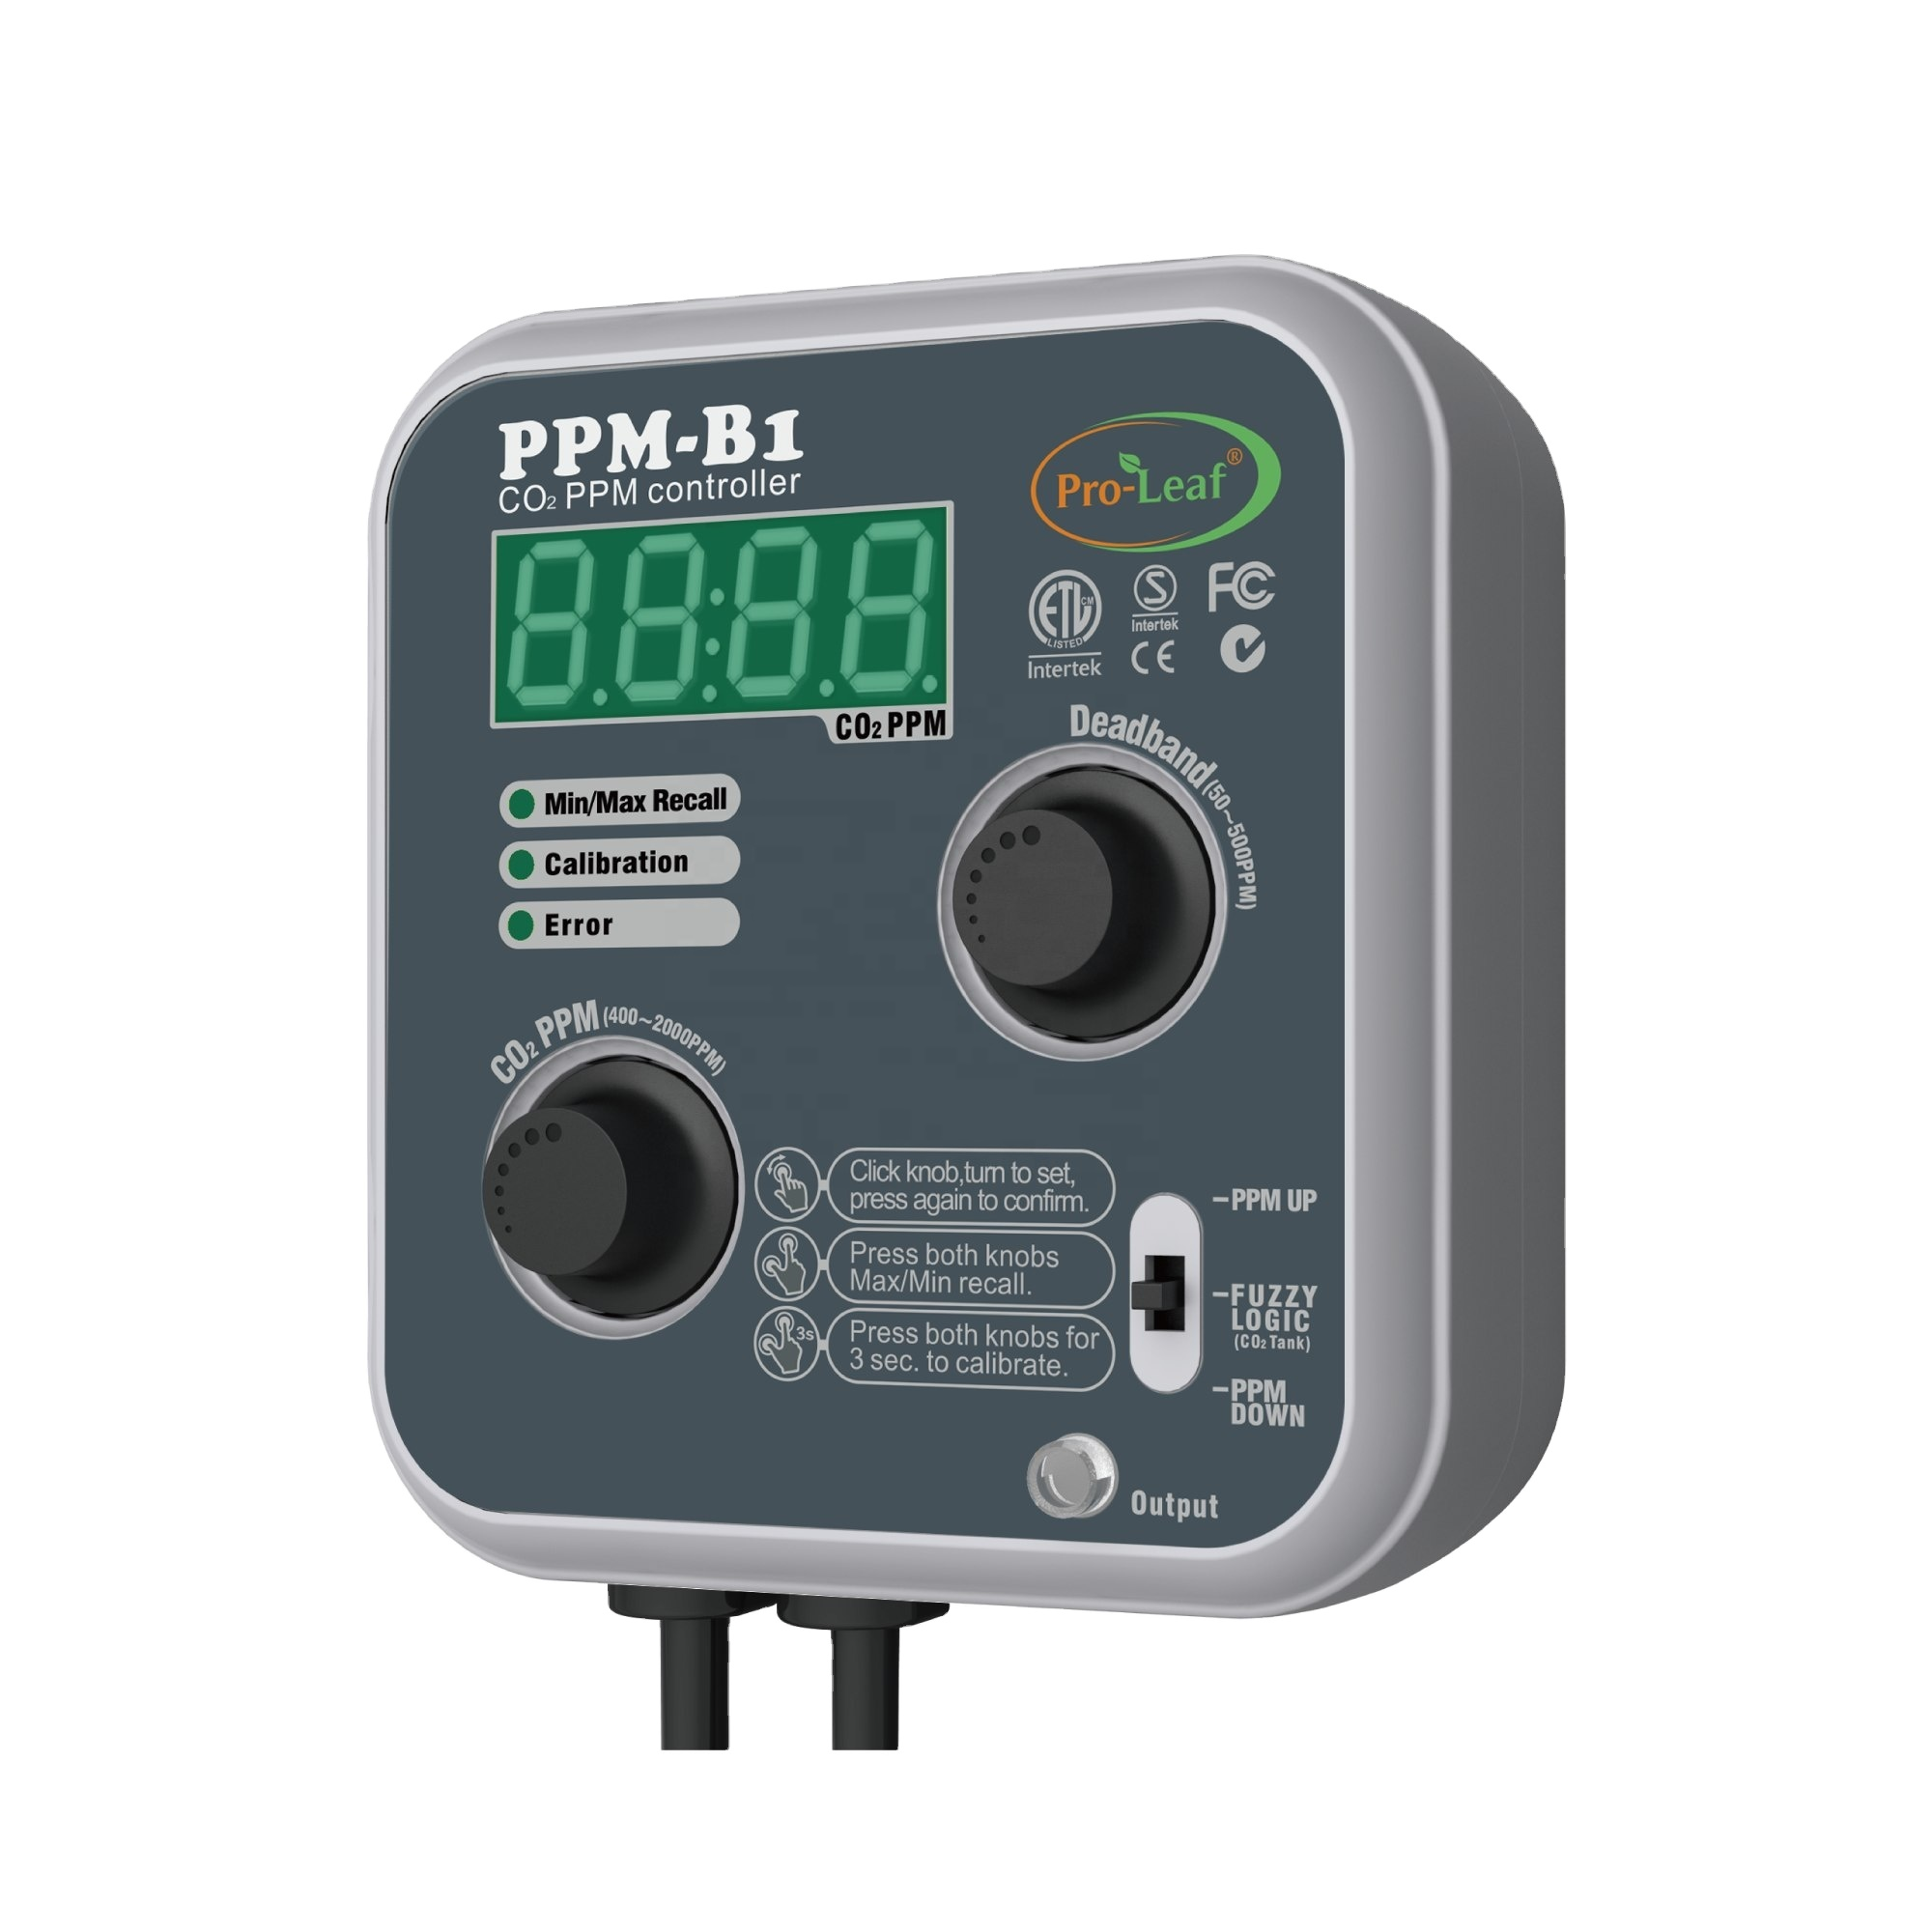 Top PPM-B1 Top Controller PPM Ambientale CO2